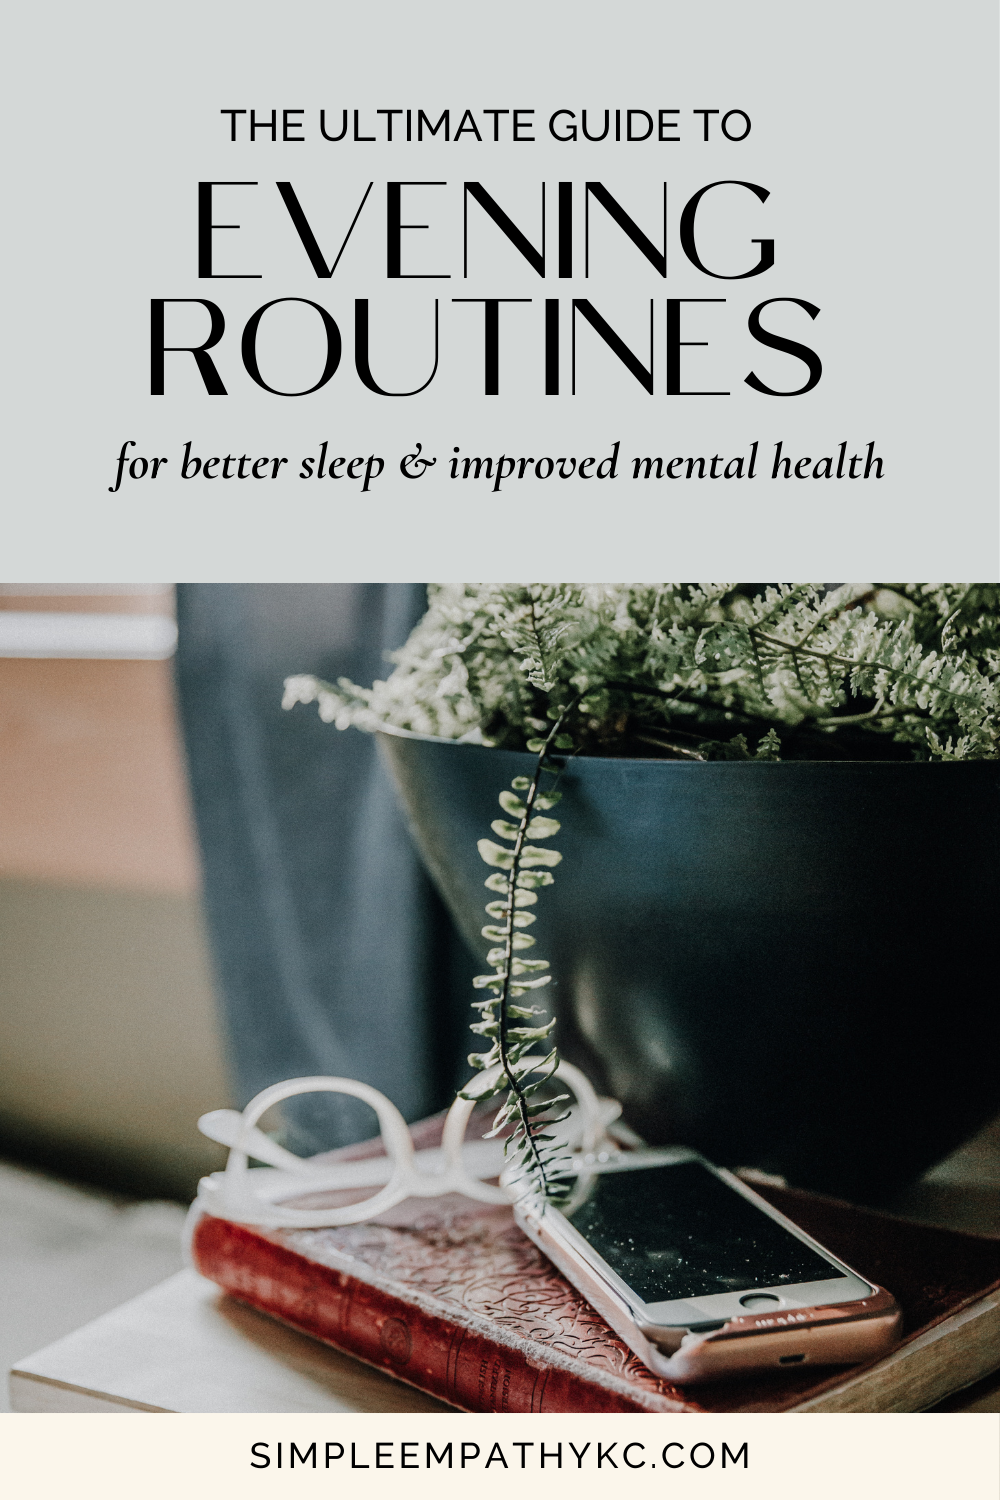 evening routines for improved mental health